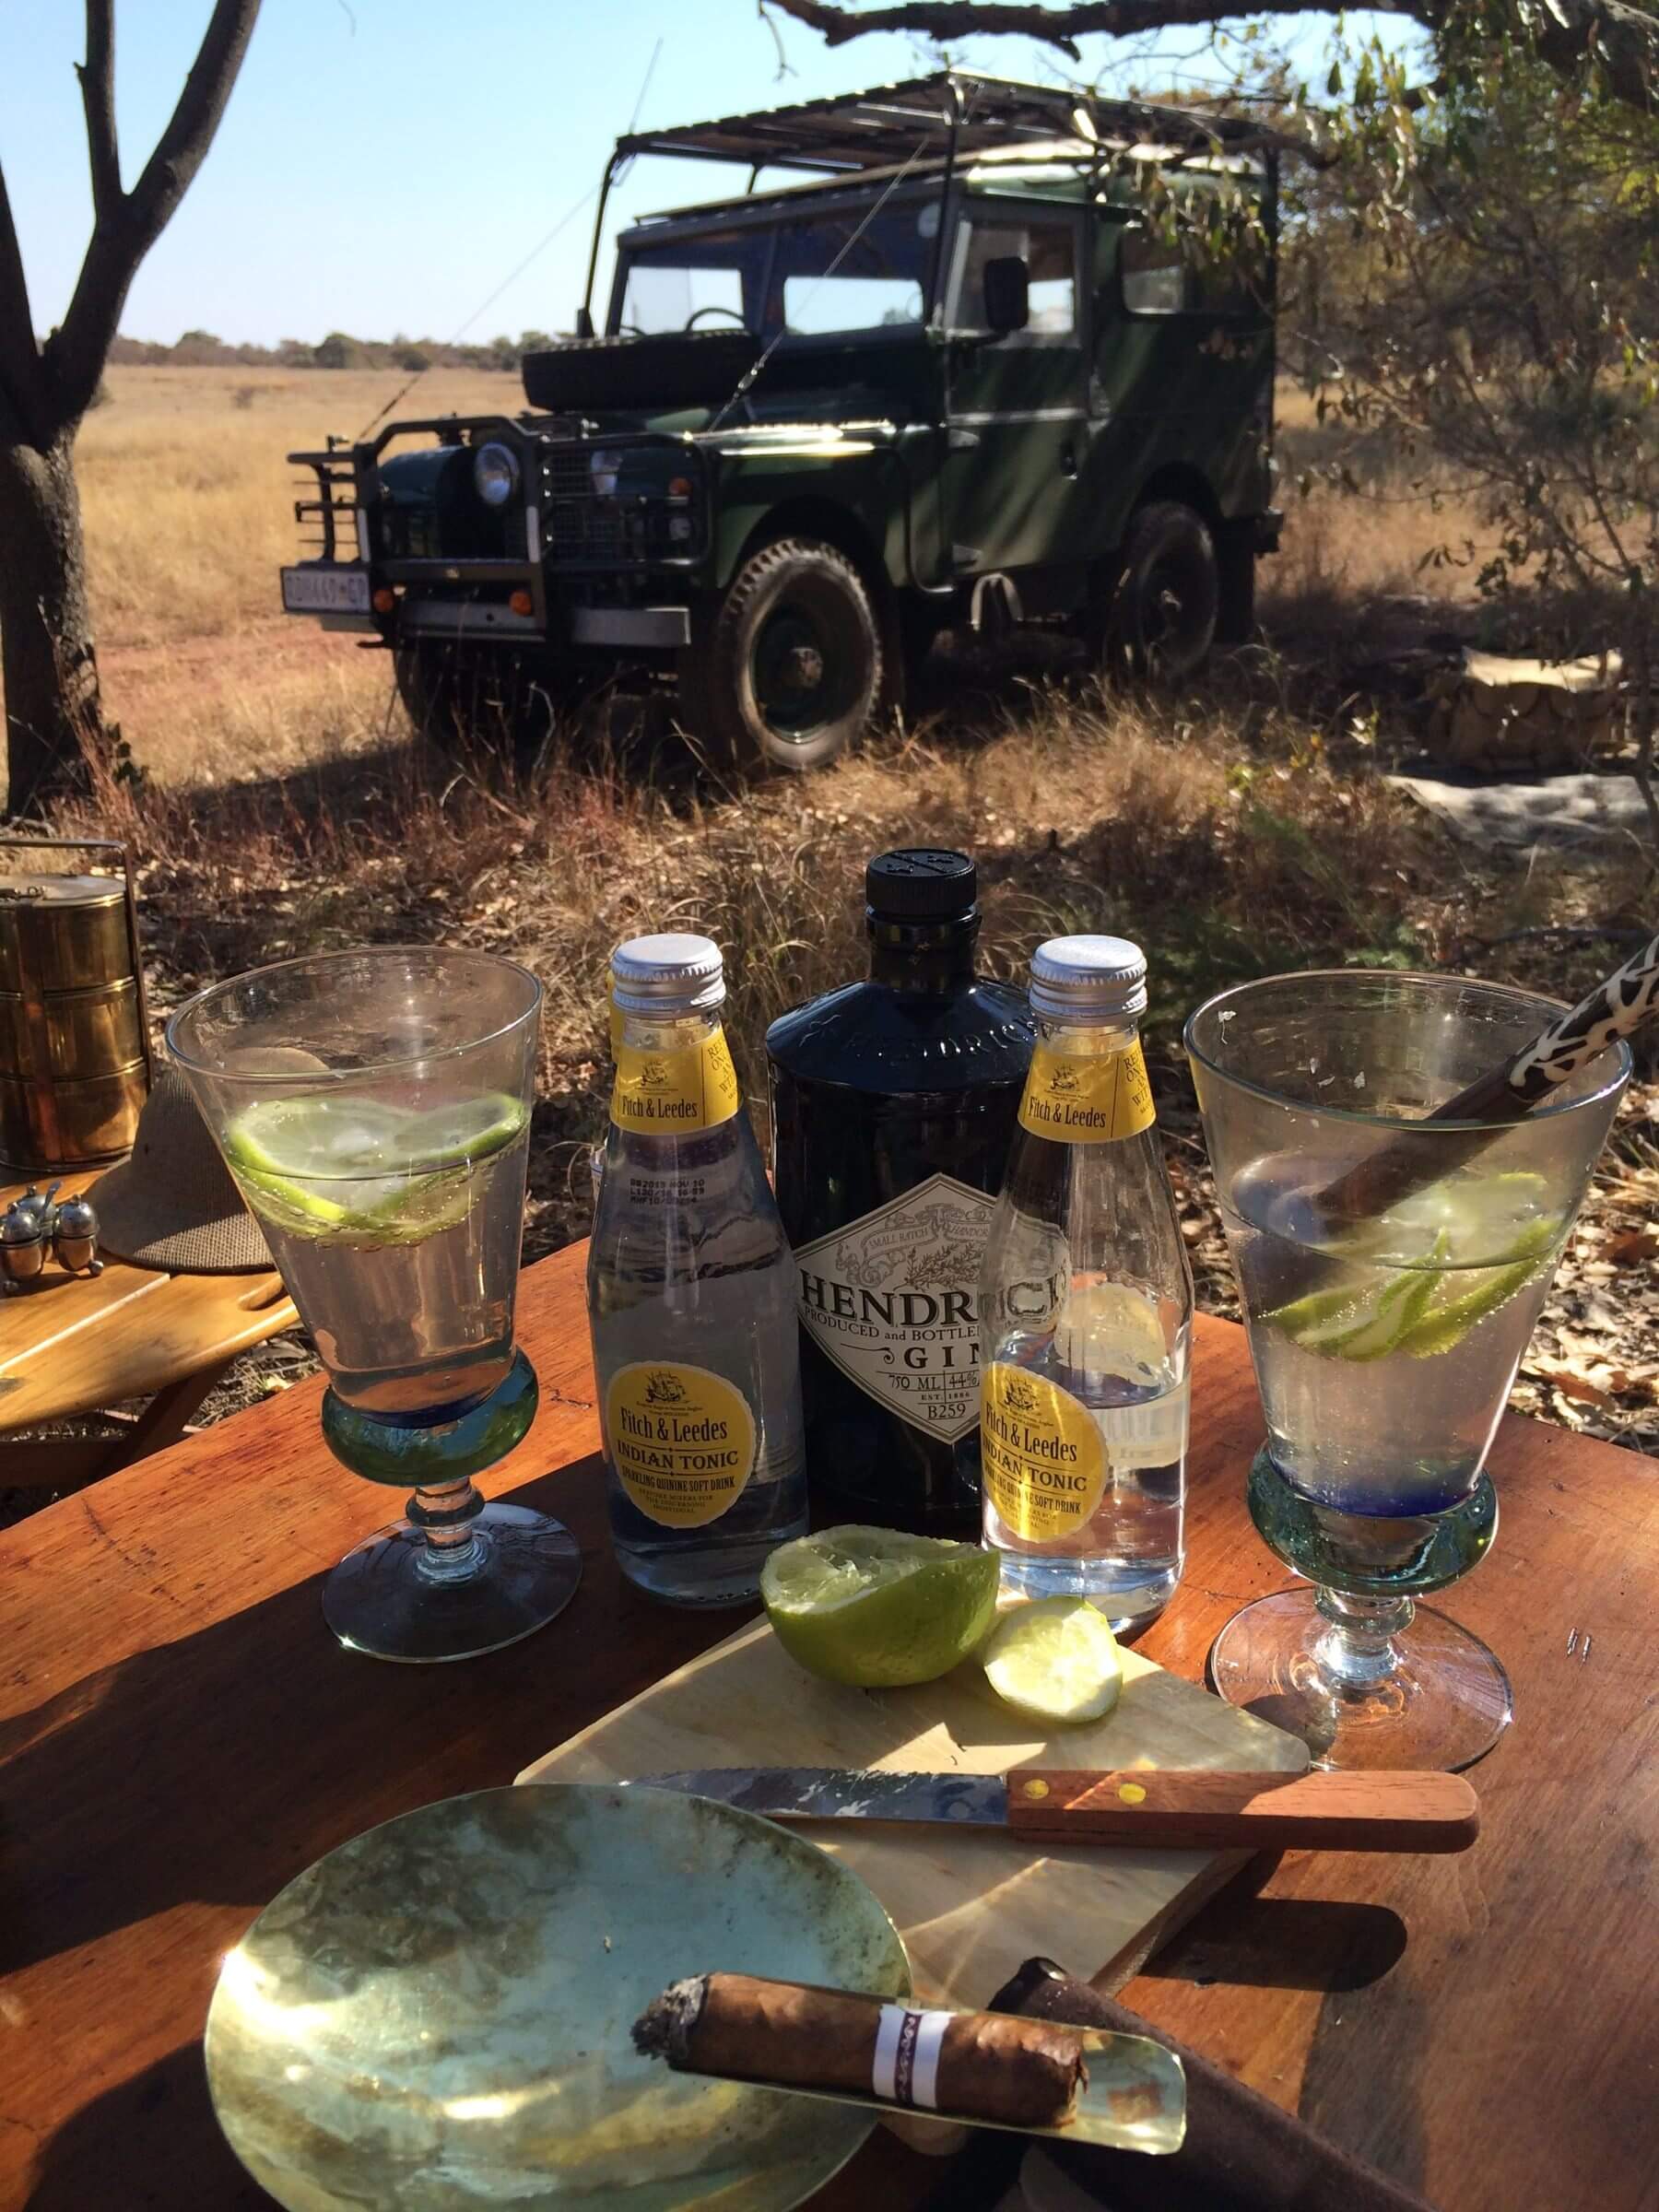 History of the Gin & Tonic and the sundowner